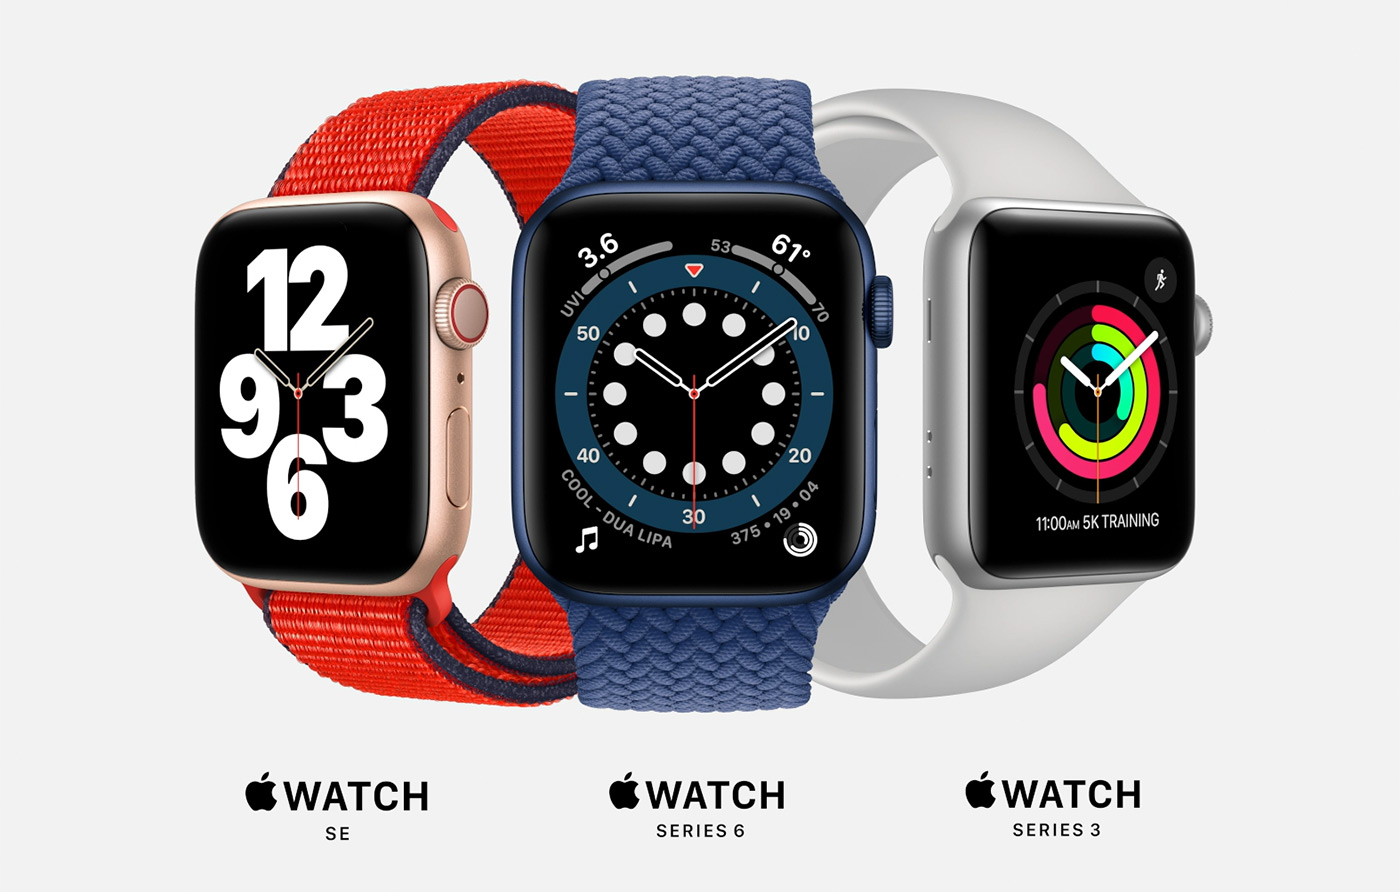 Apple's next victory: new Apple Watch and iPad